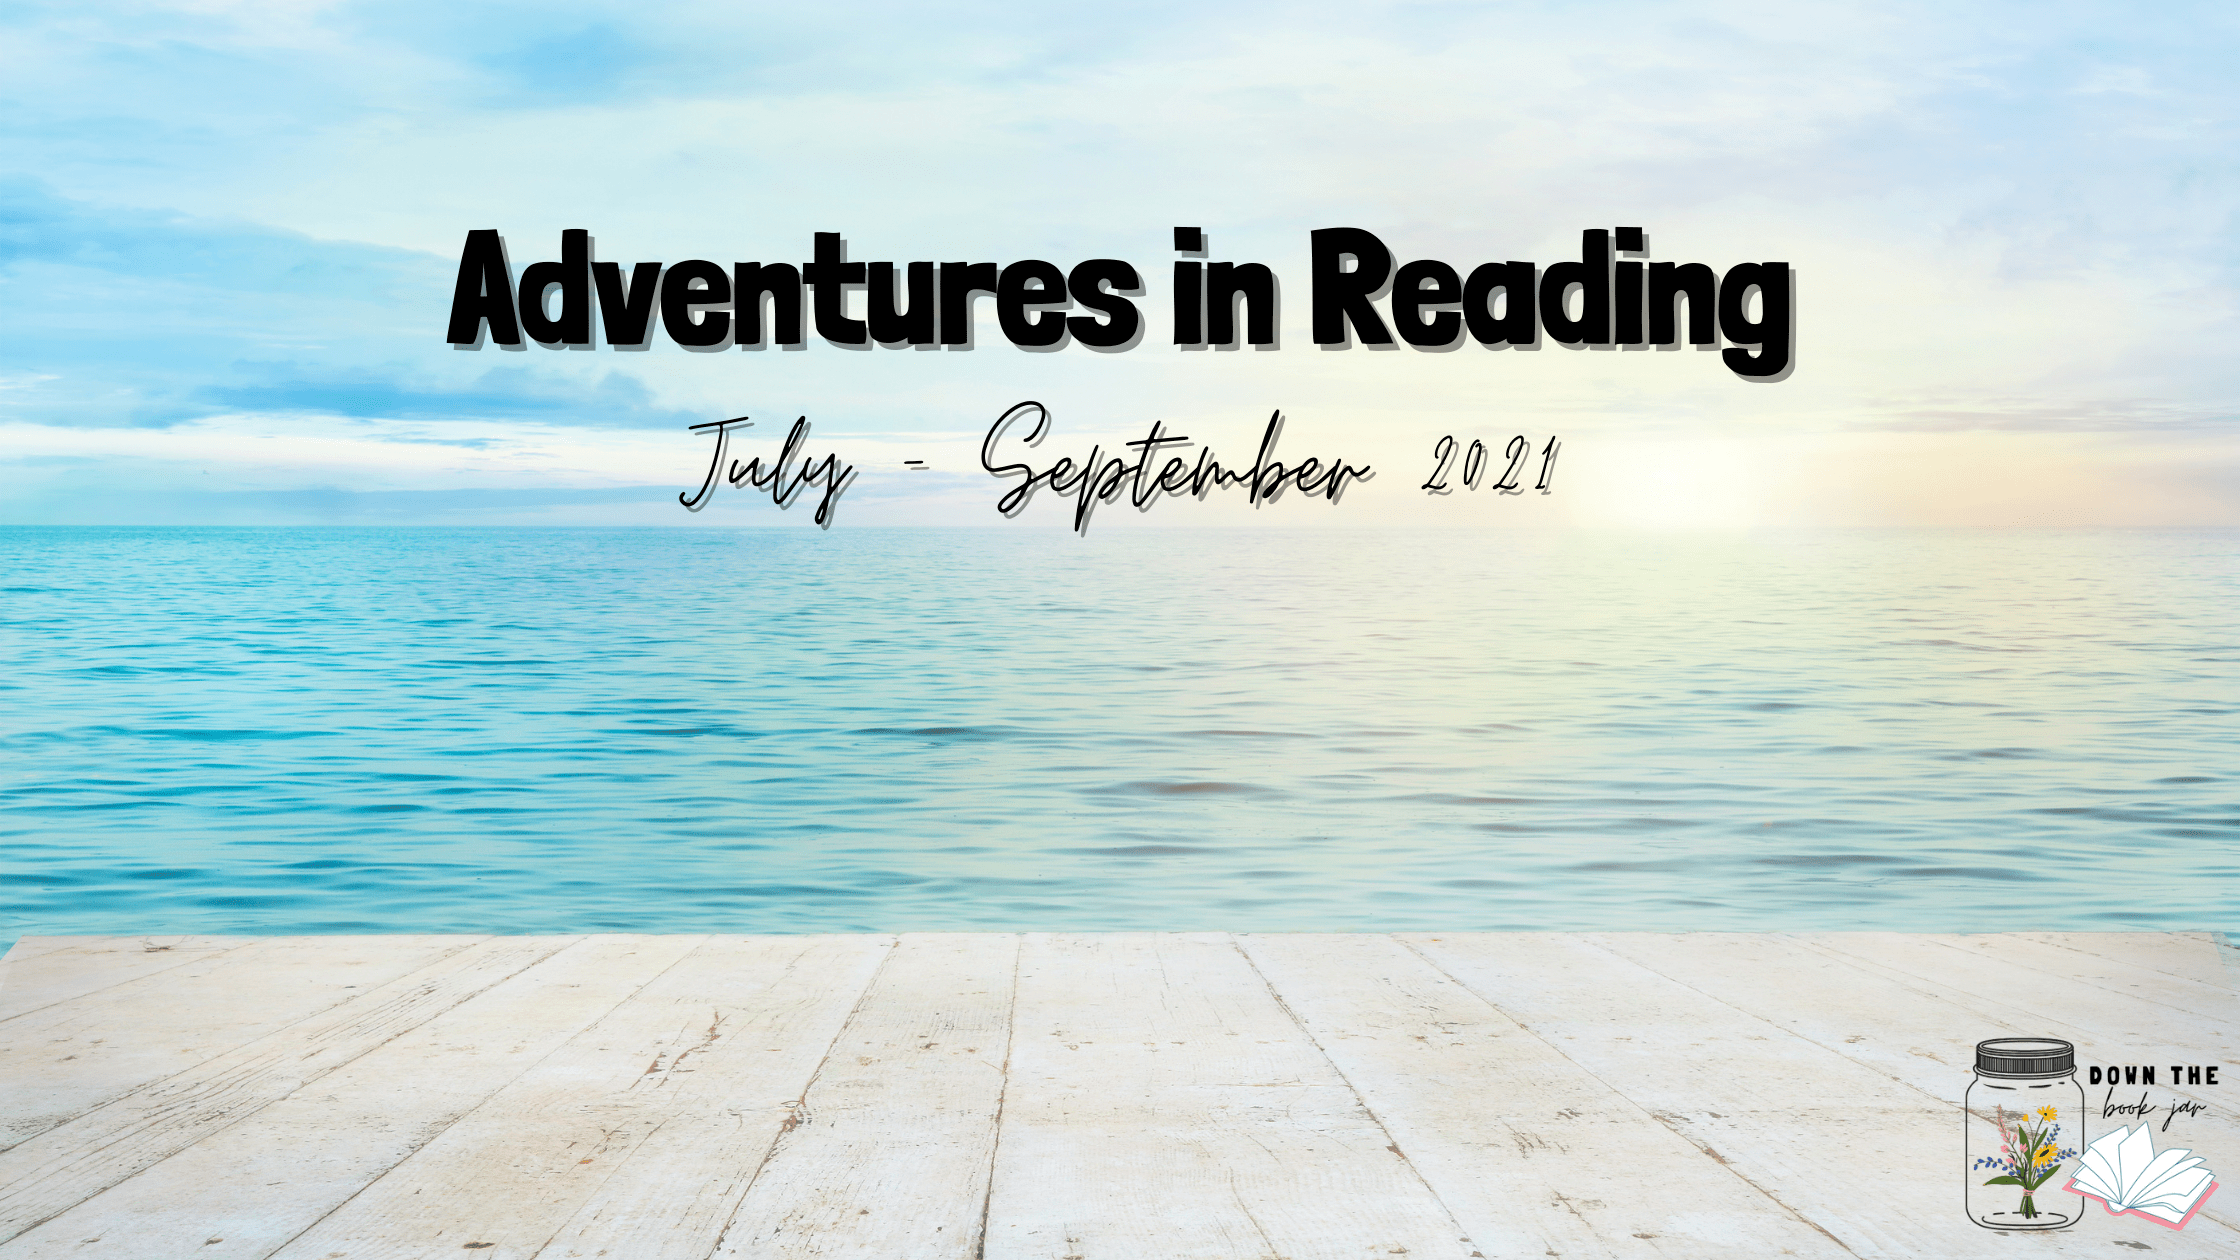 Adventures in Reading – July through September 2021